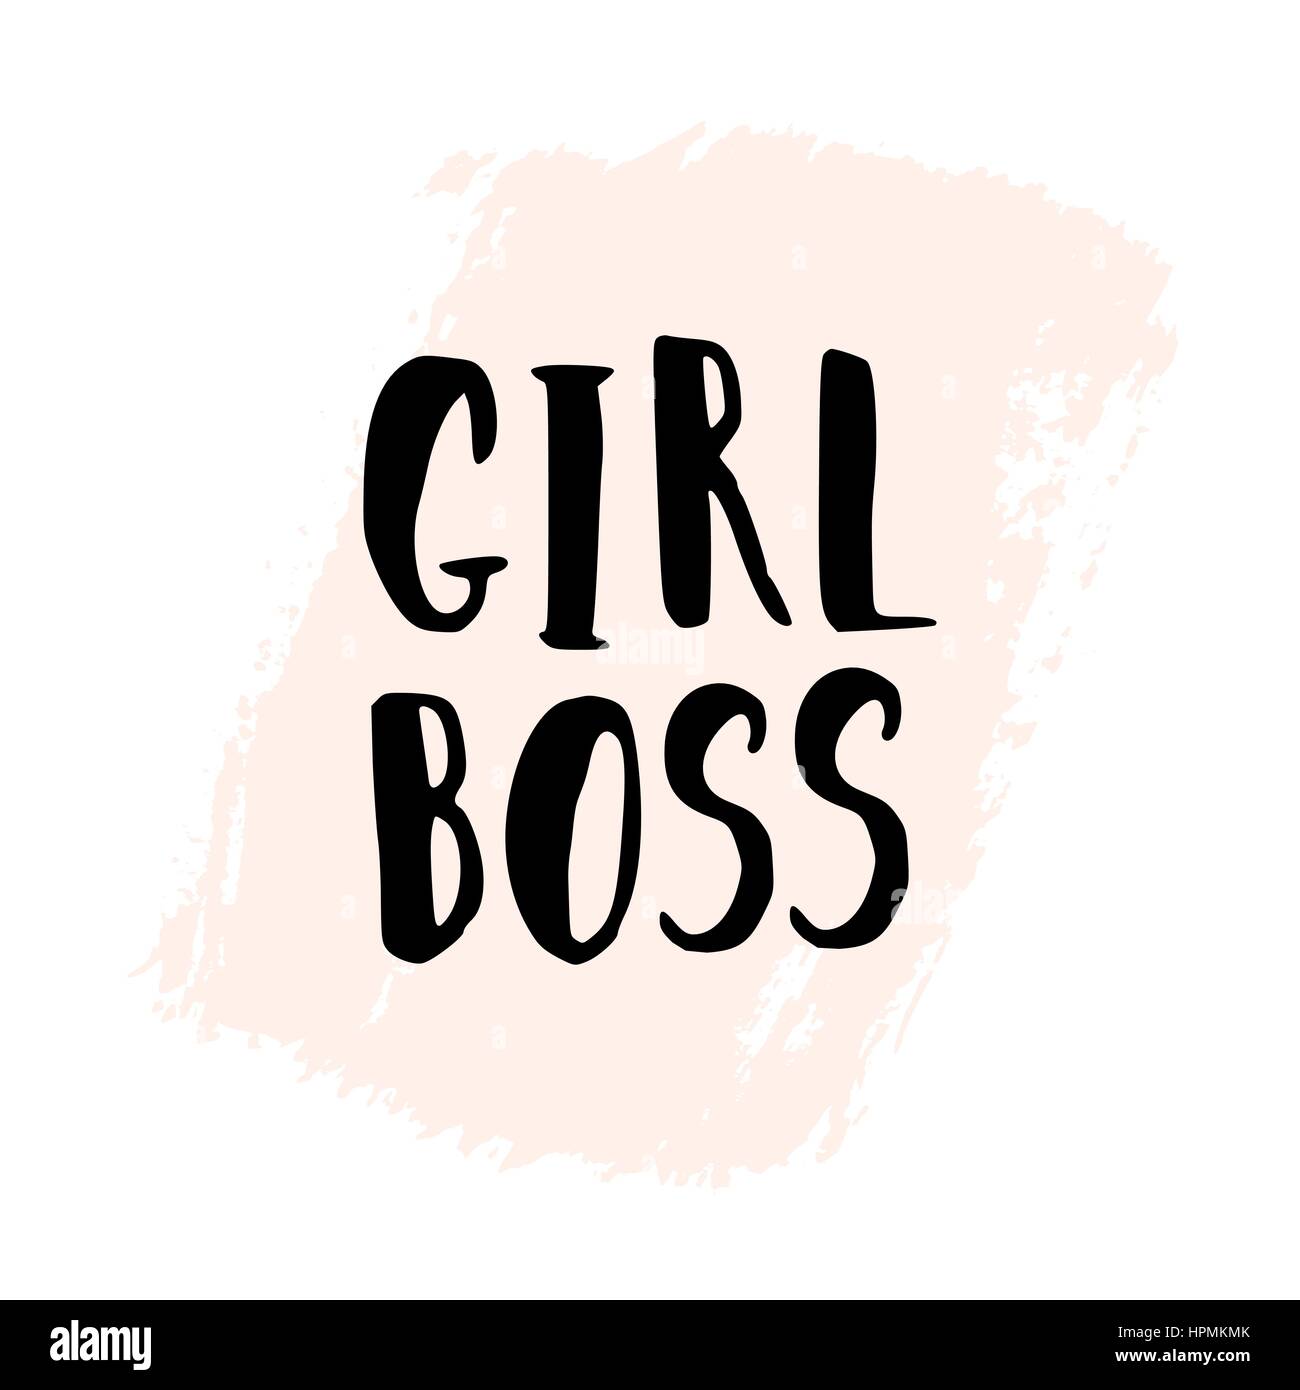 Girl Boss - inspirational quote poster design. Hand lettered text in black with pale pink brush stroke on white. Stock Vector